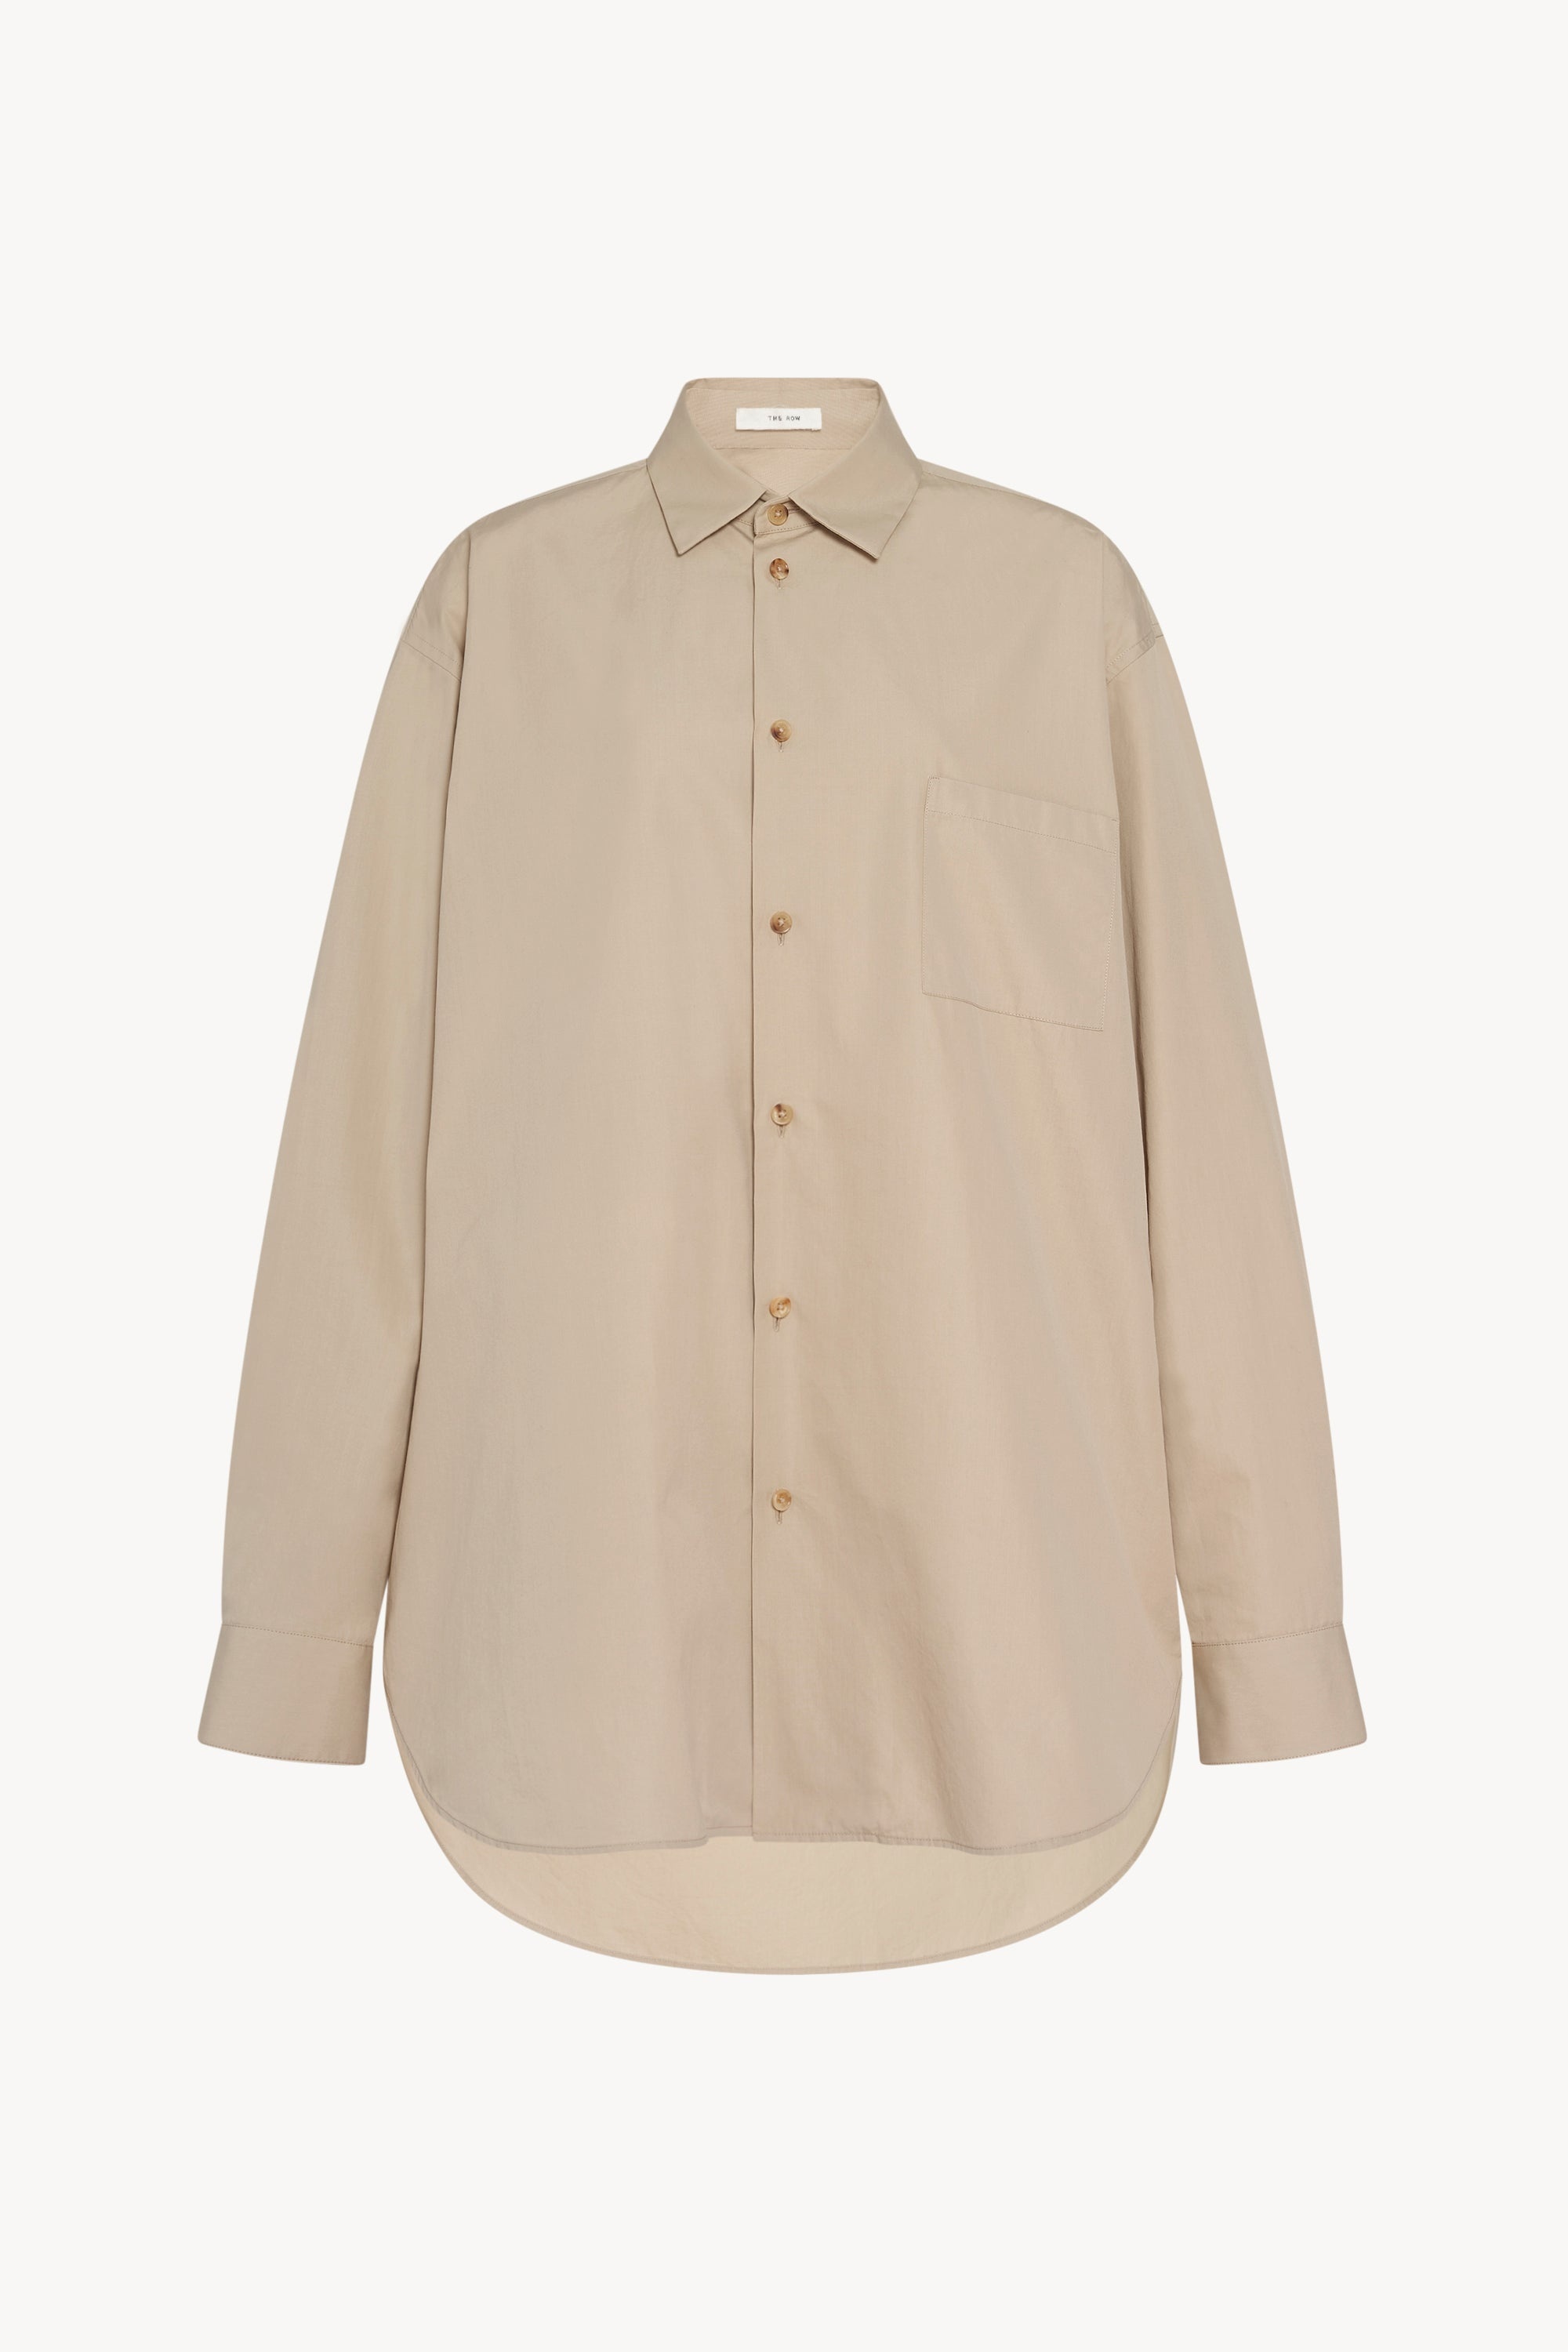 Brant Shirt in Cotton - 1